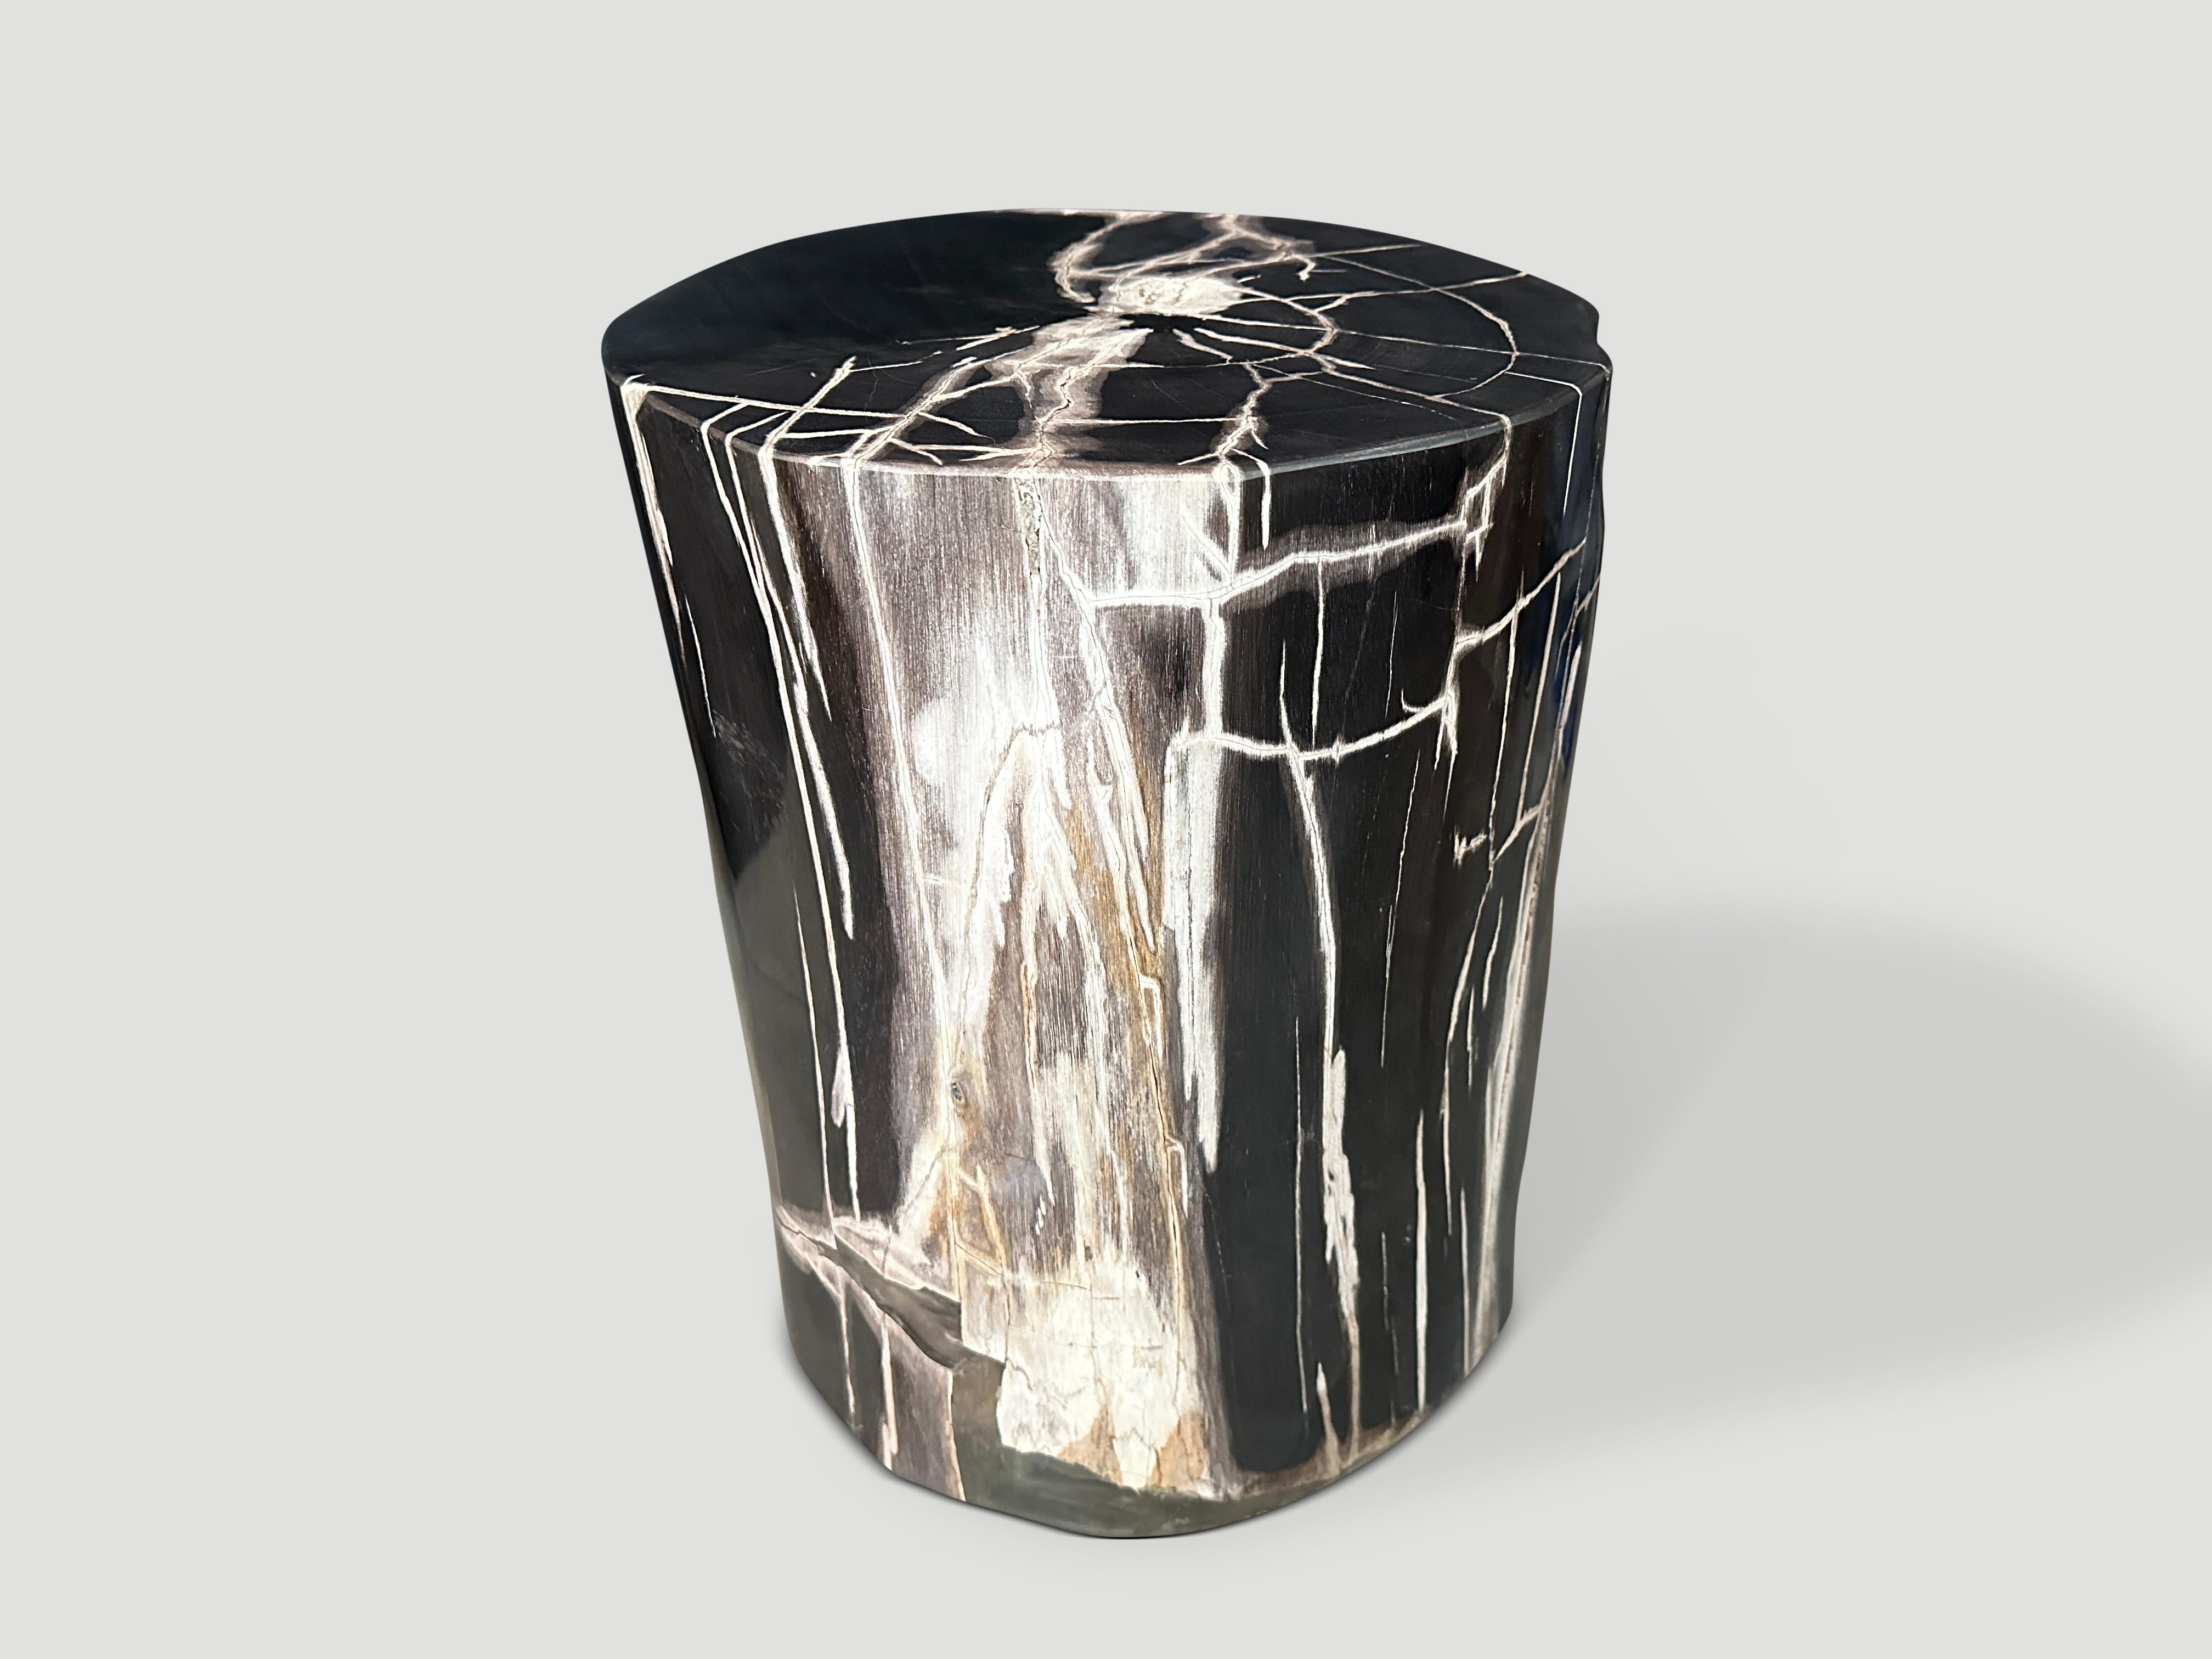 Andrianna Shamaris Exquisite Super Smooth Petrified Wood Side Table In Excellent Condition For Sale In New York, NY